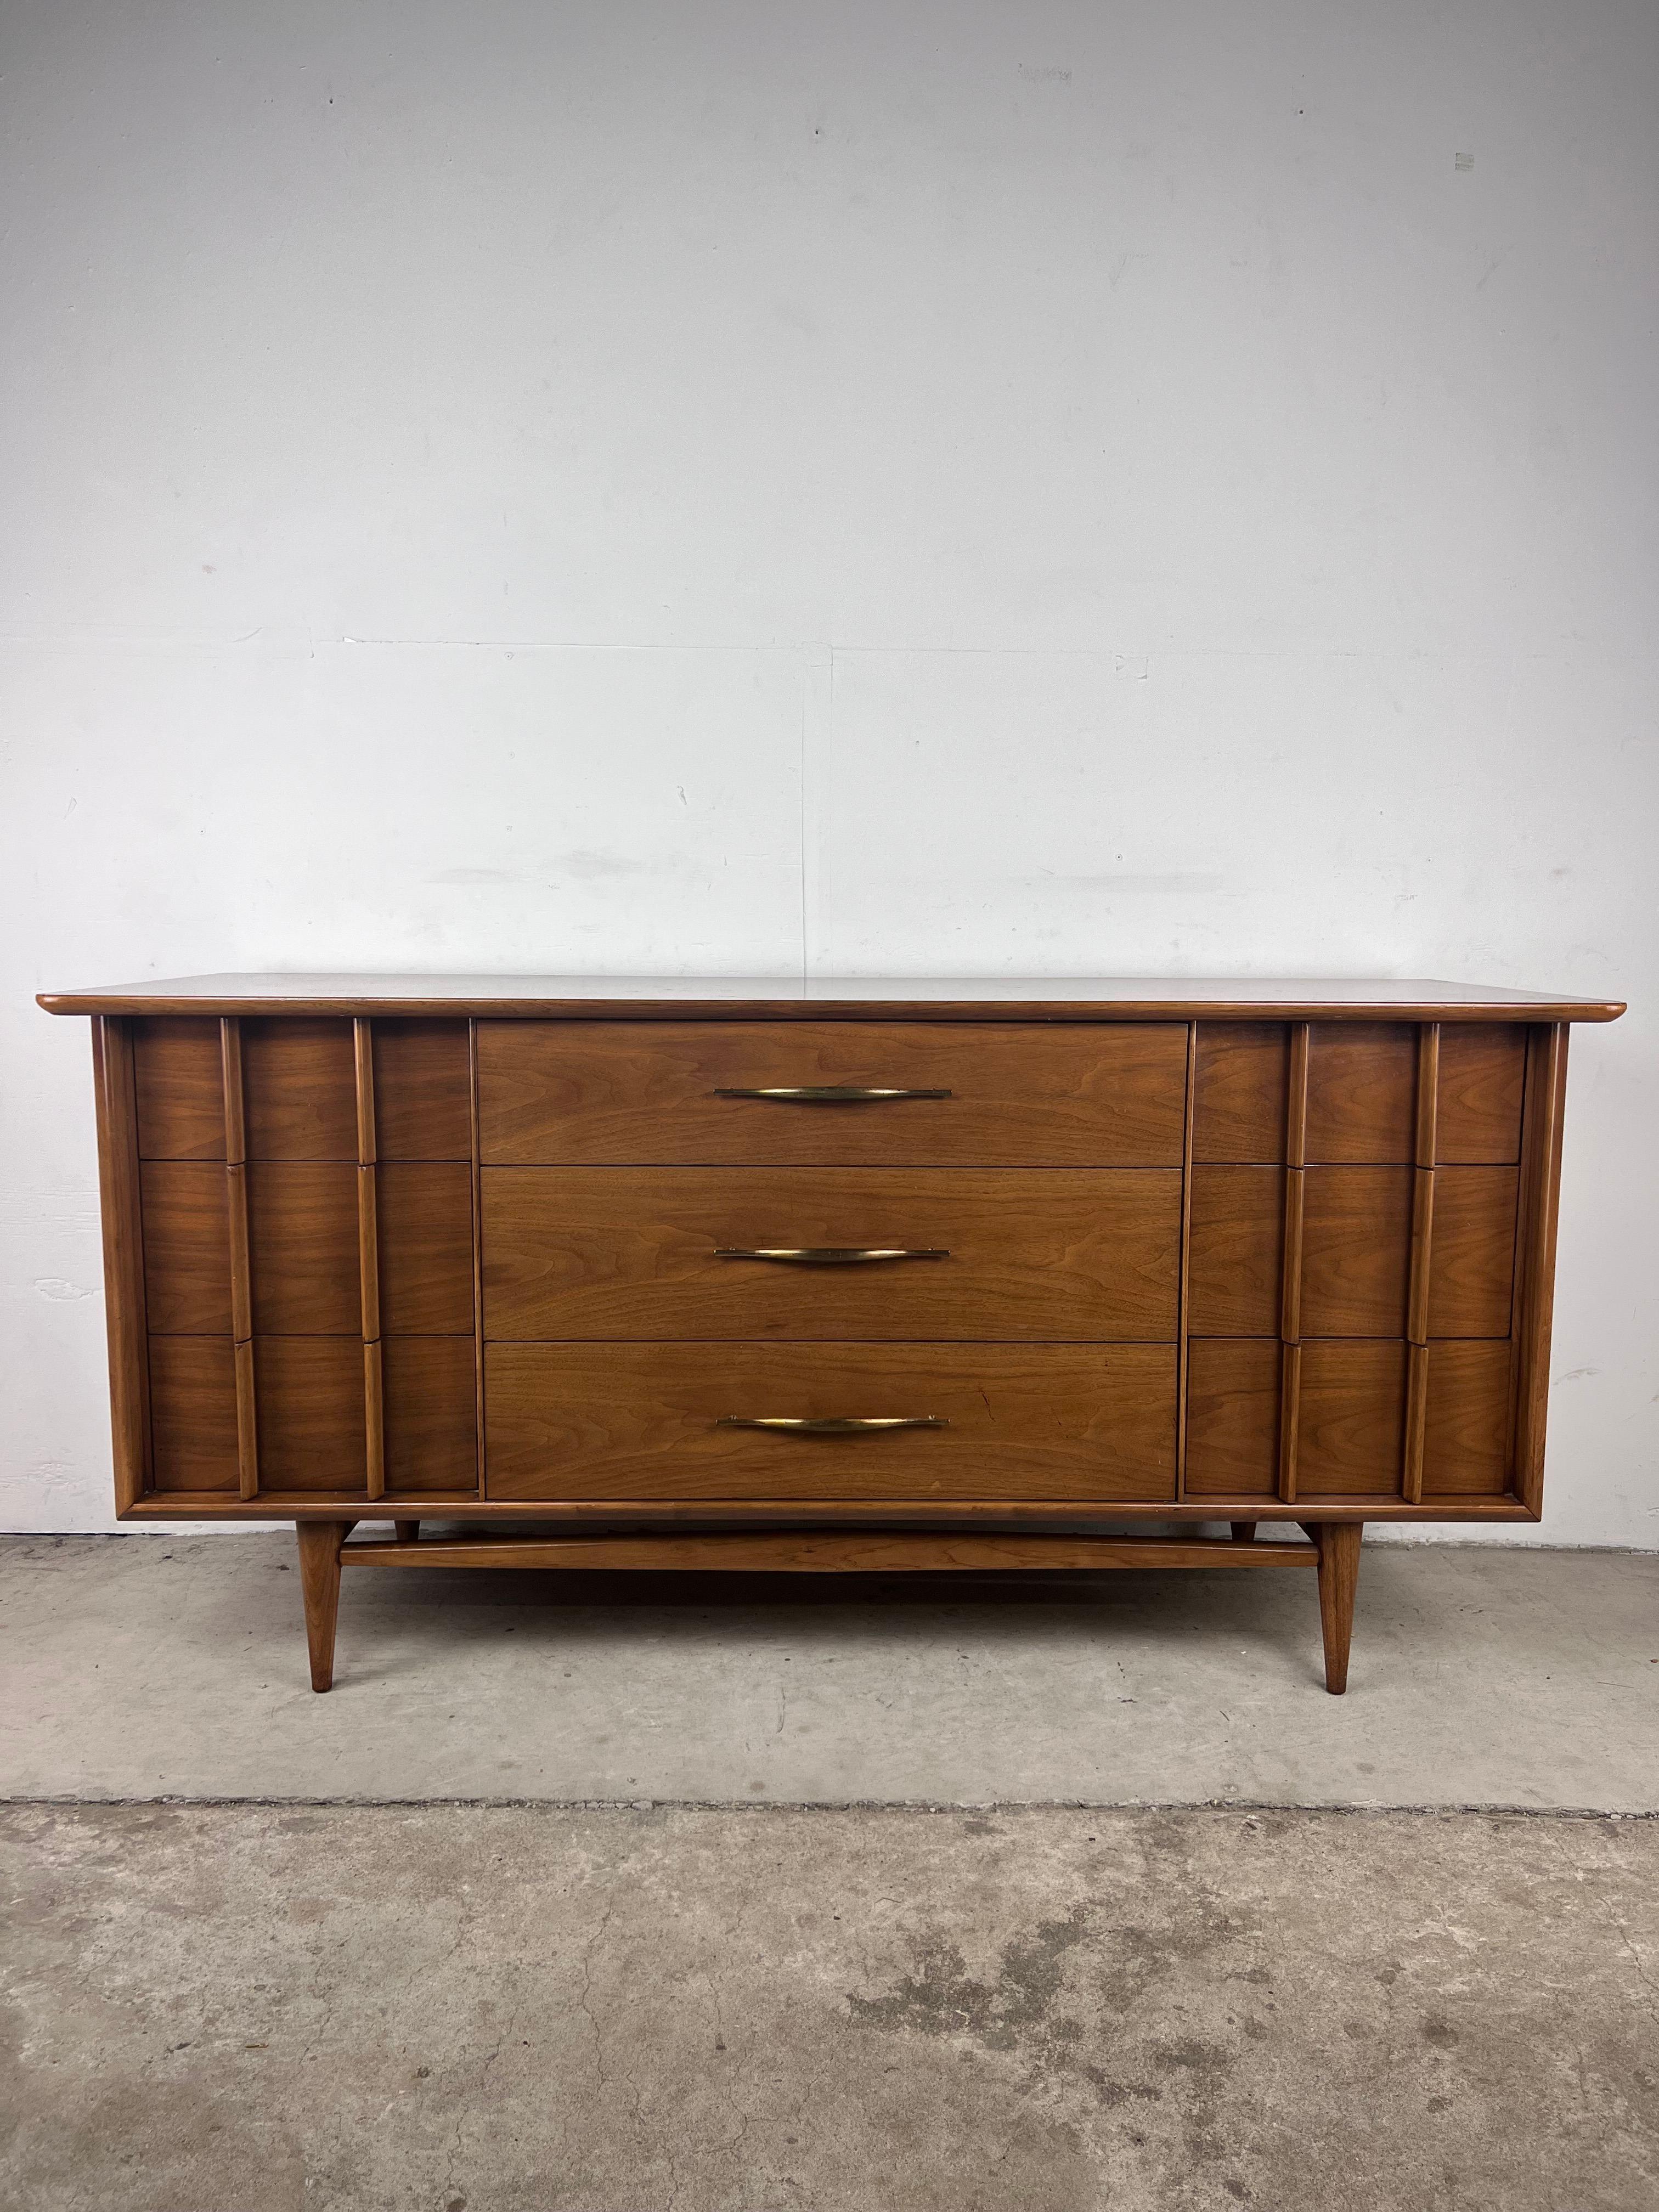 This Mid-Century Modern lowboy dresser from the 